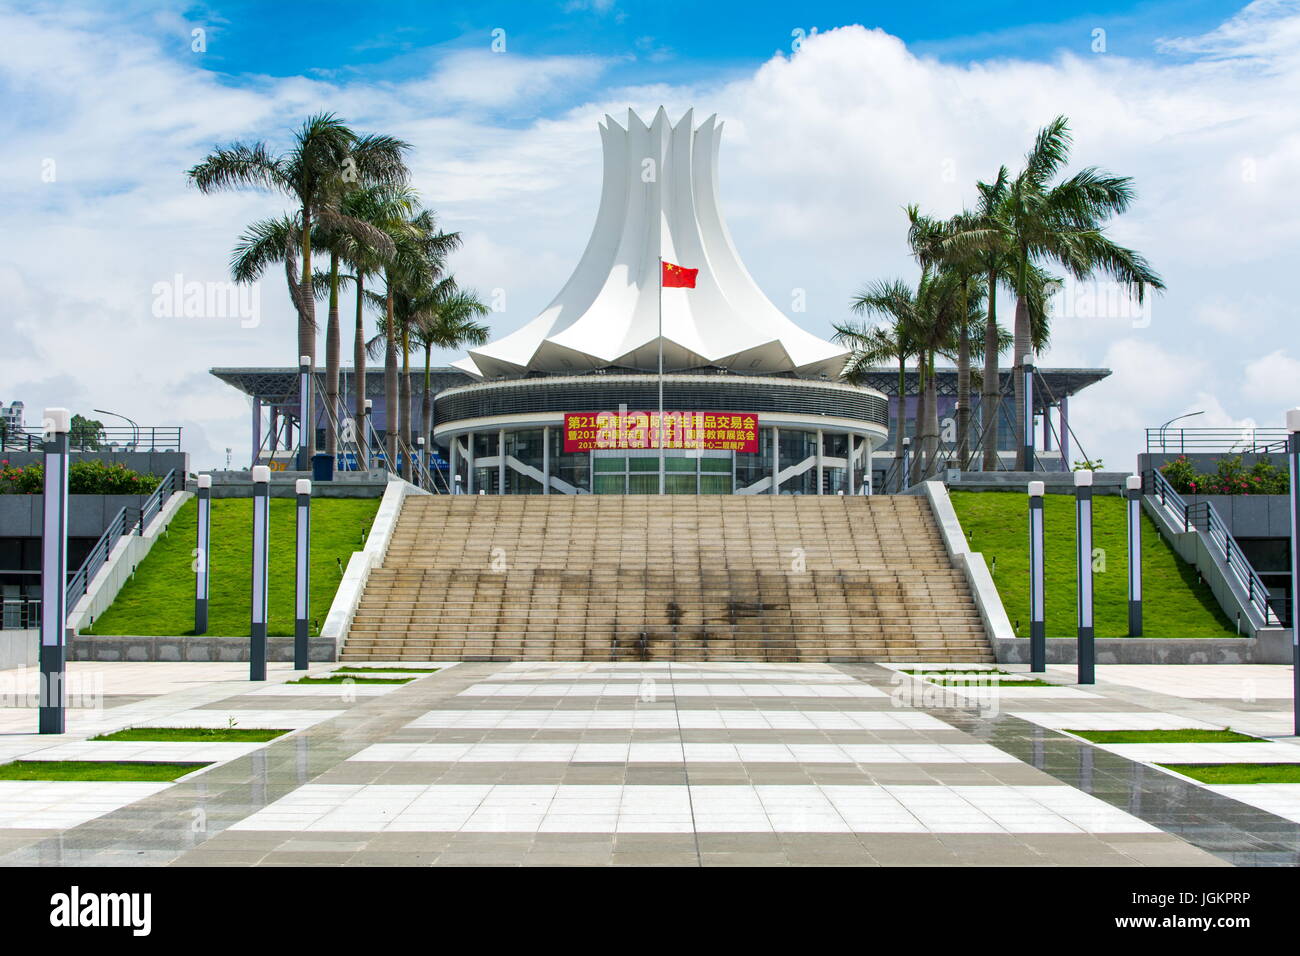 NANNING, CHINA - JUNE 9, 2017: Guangxi International Convention and Exhibition Center in Nanning, Guangxi capital. This is an important place where di Stock Photo